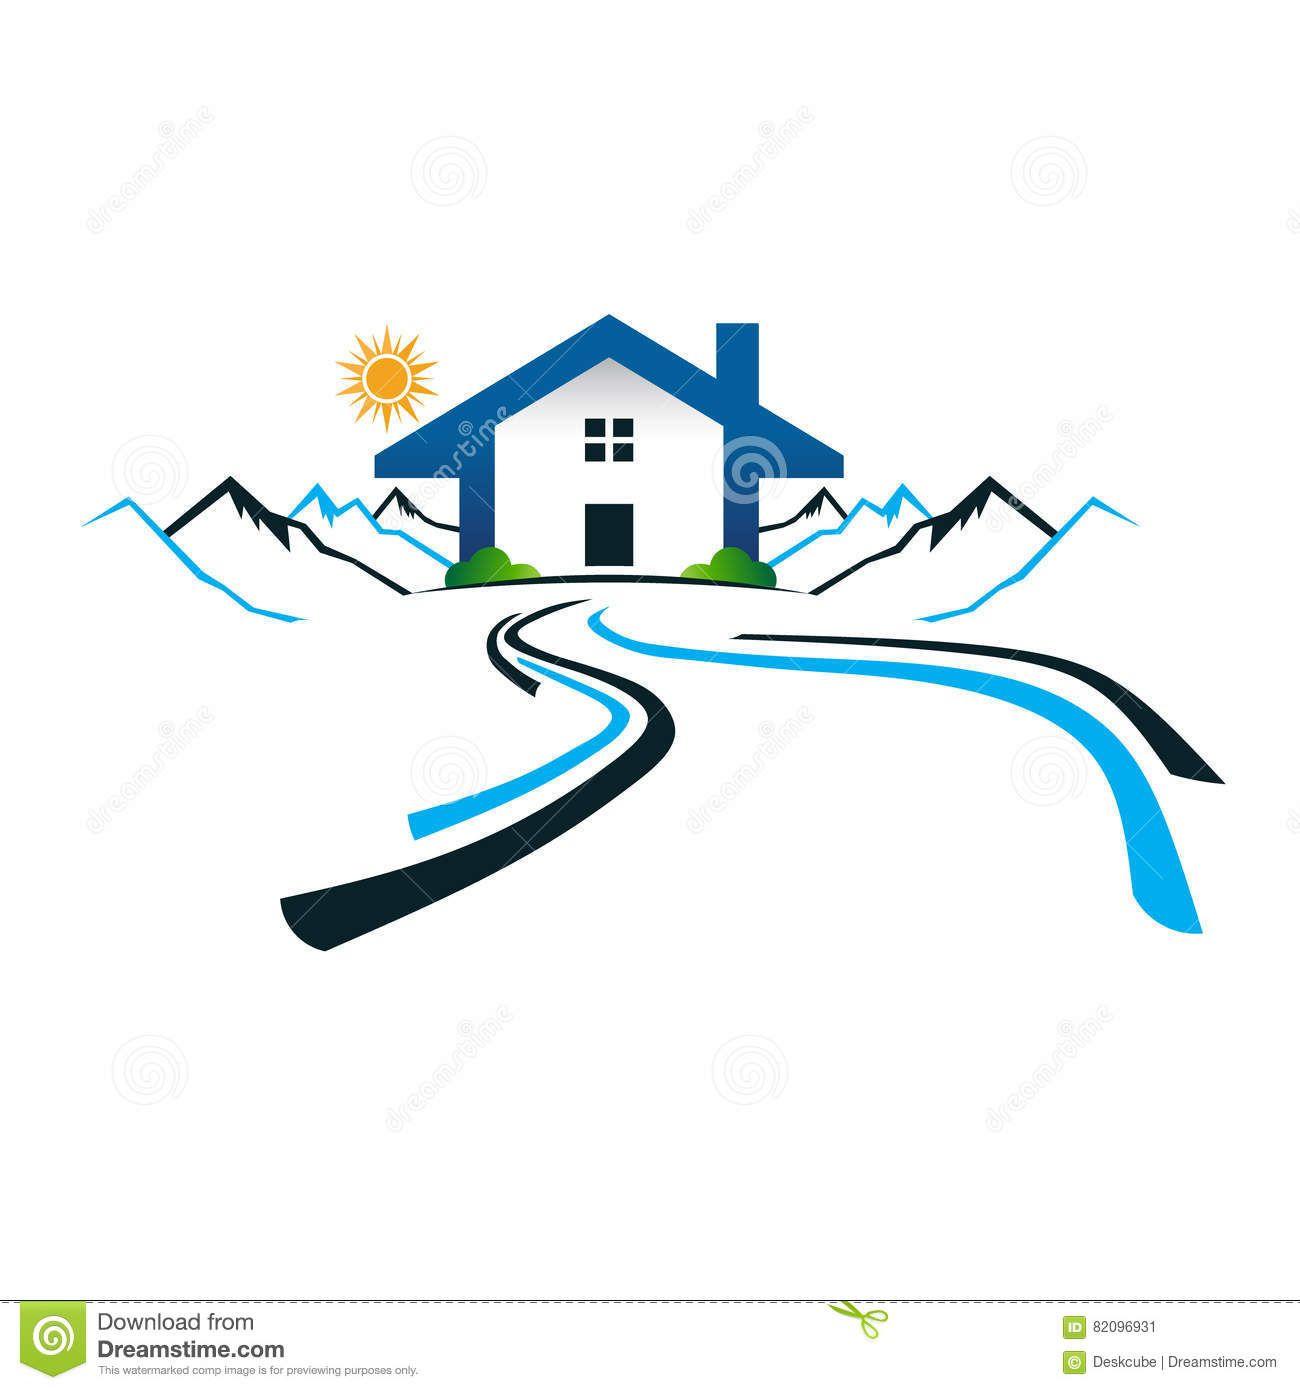 House Mountain Logo - House Surrouonded by Mountains with road Access. Sun. Mountains